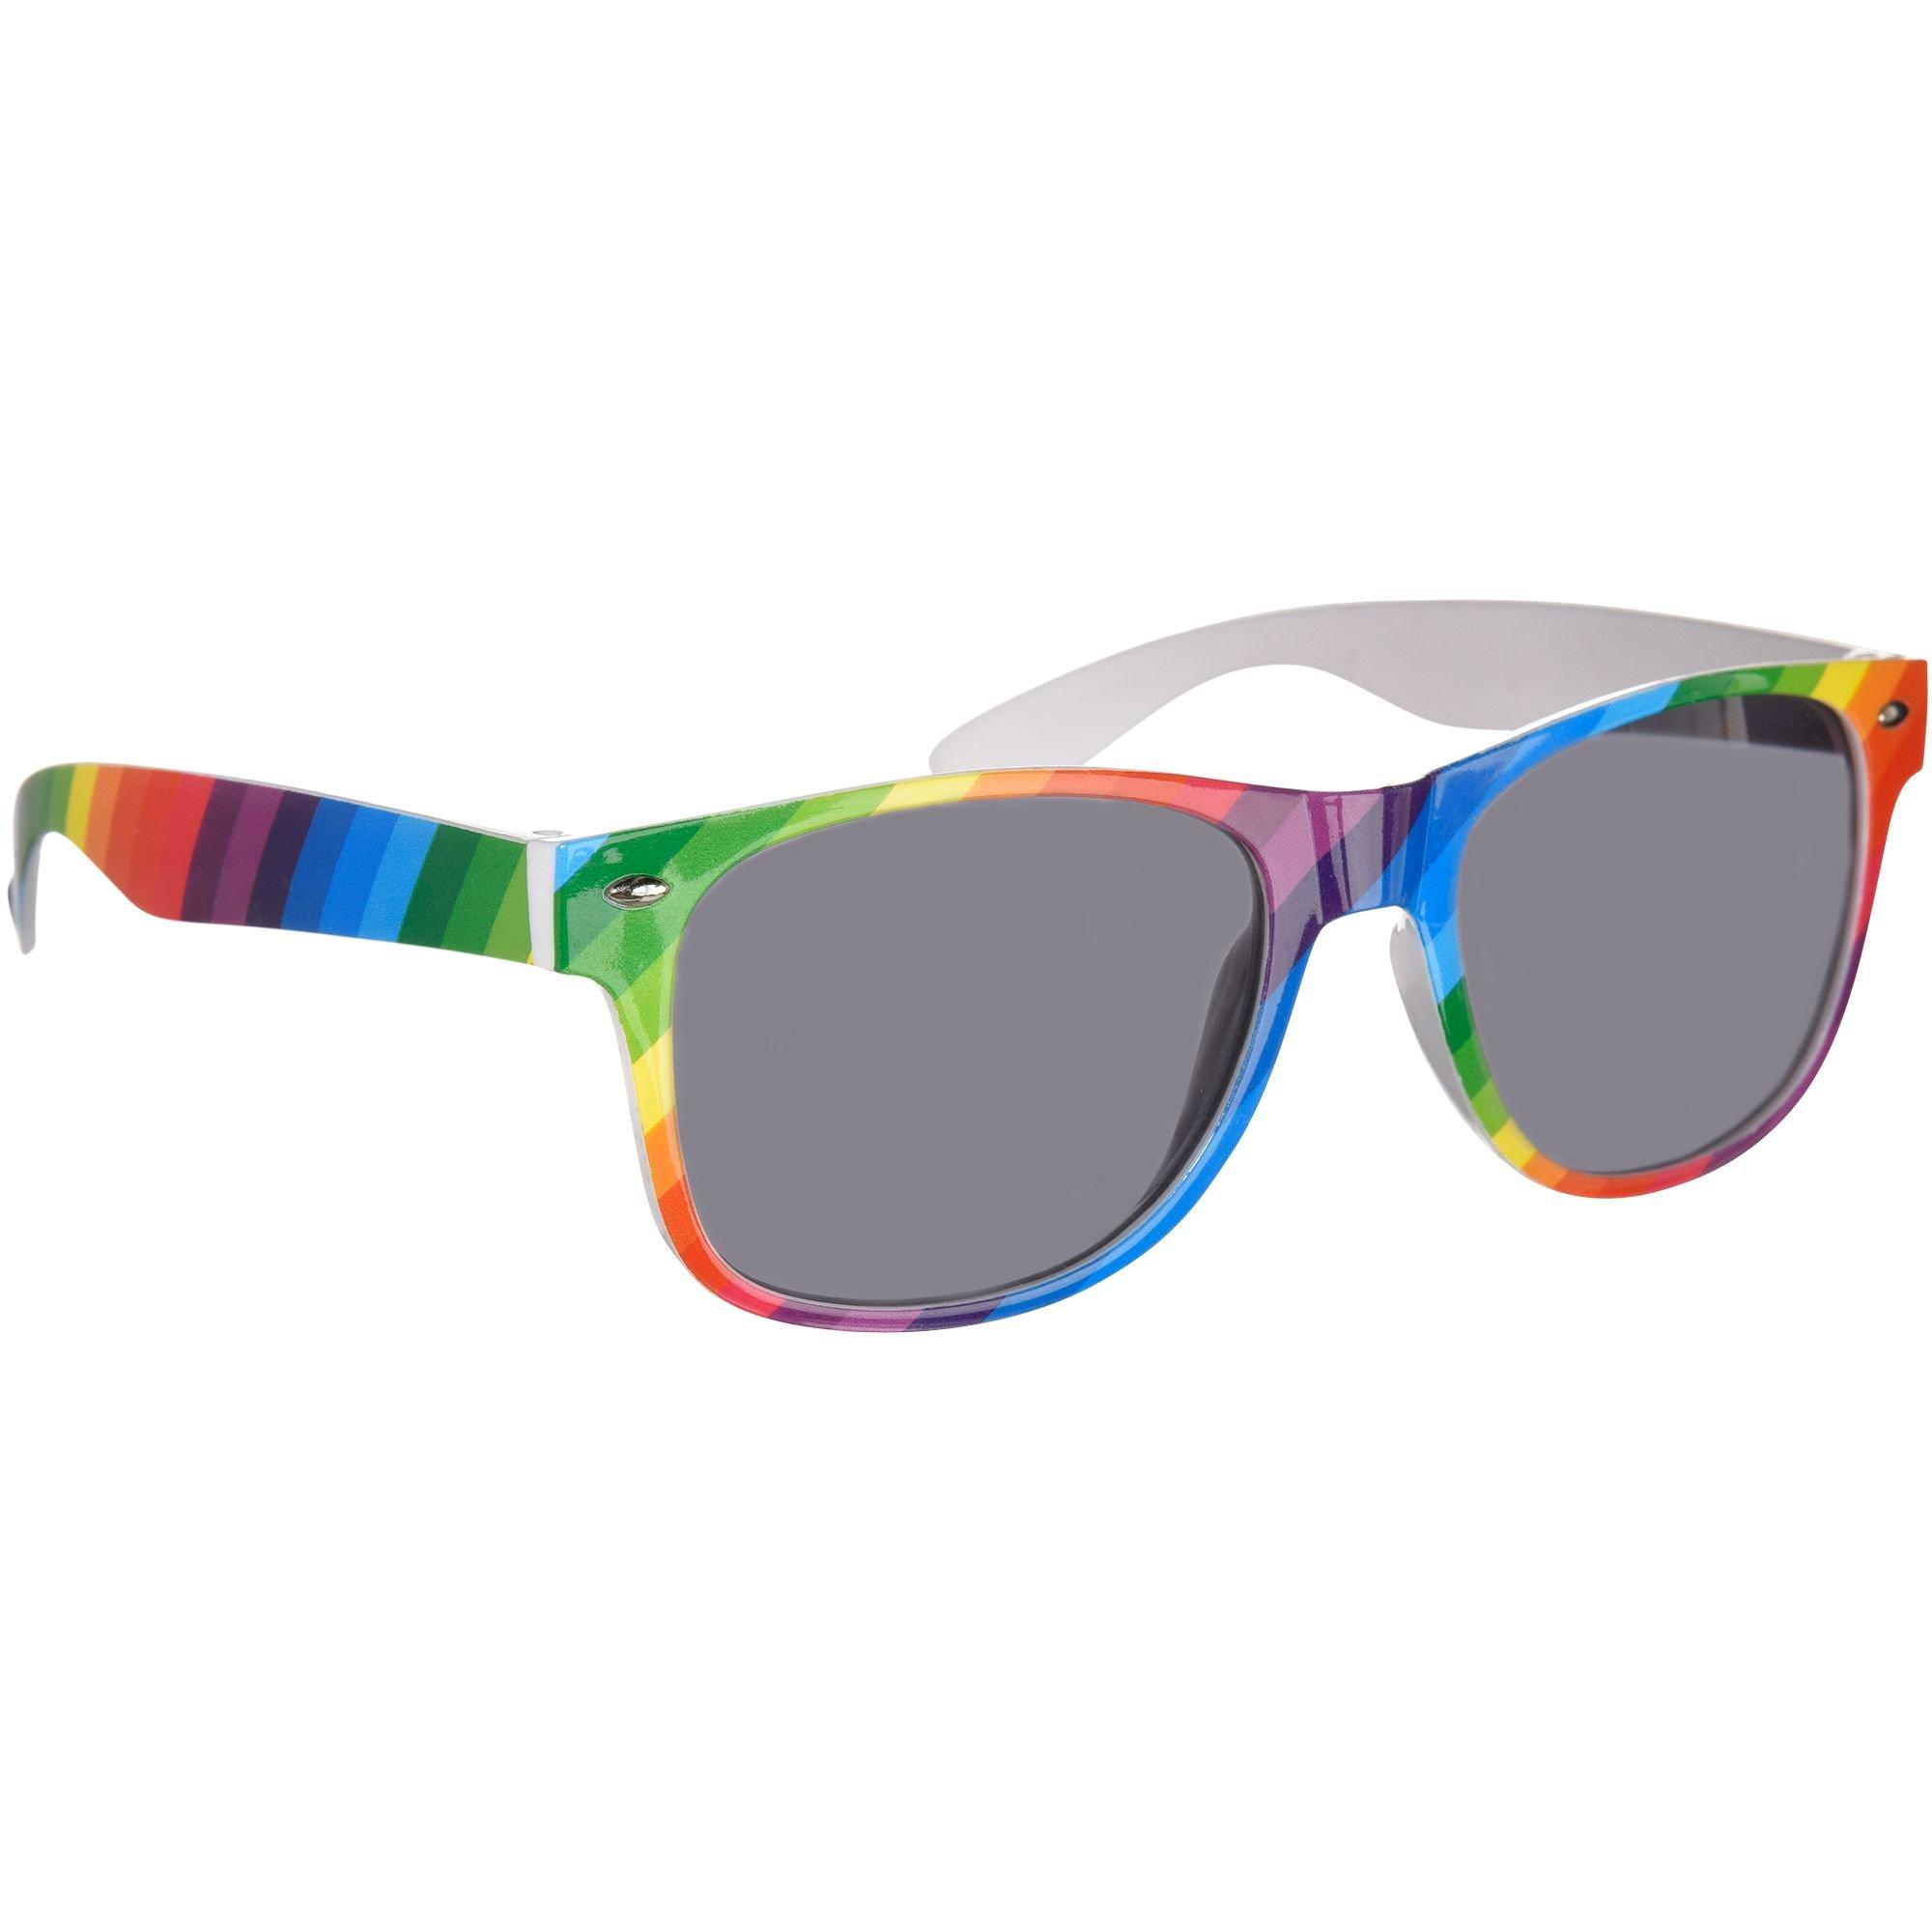 1pc Men's Square Rainbow Color Frame Sunglasses Suitable For Daily